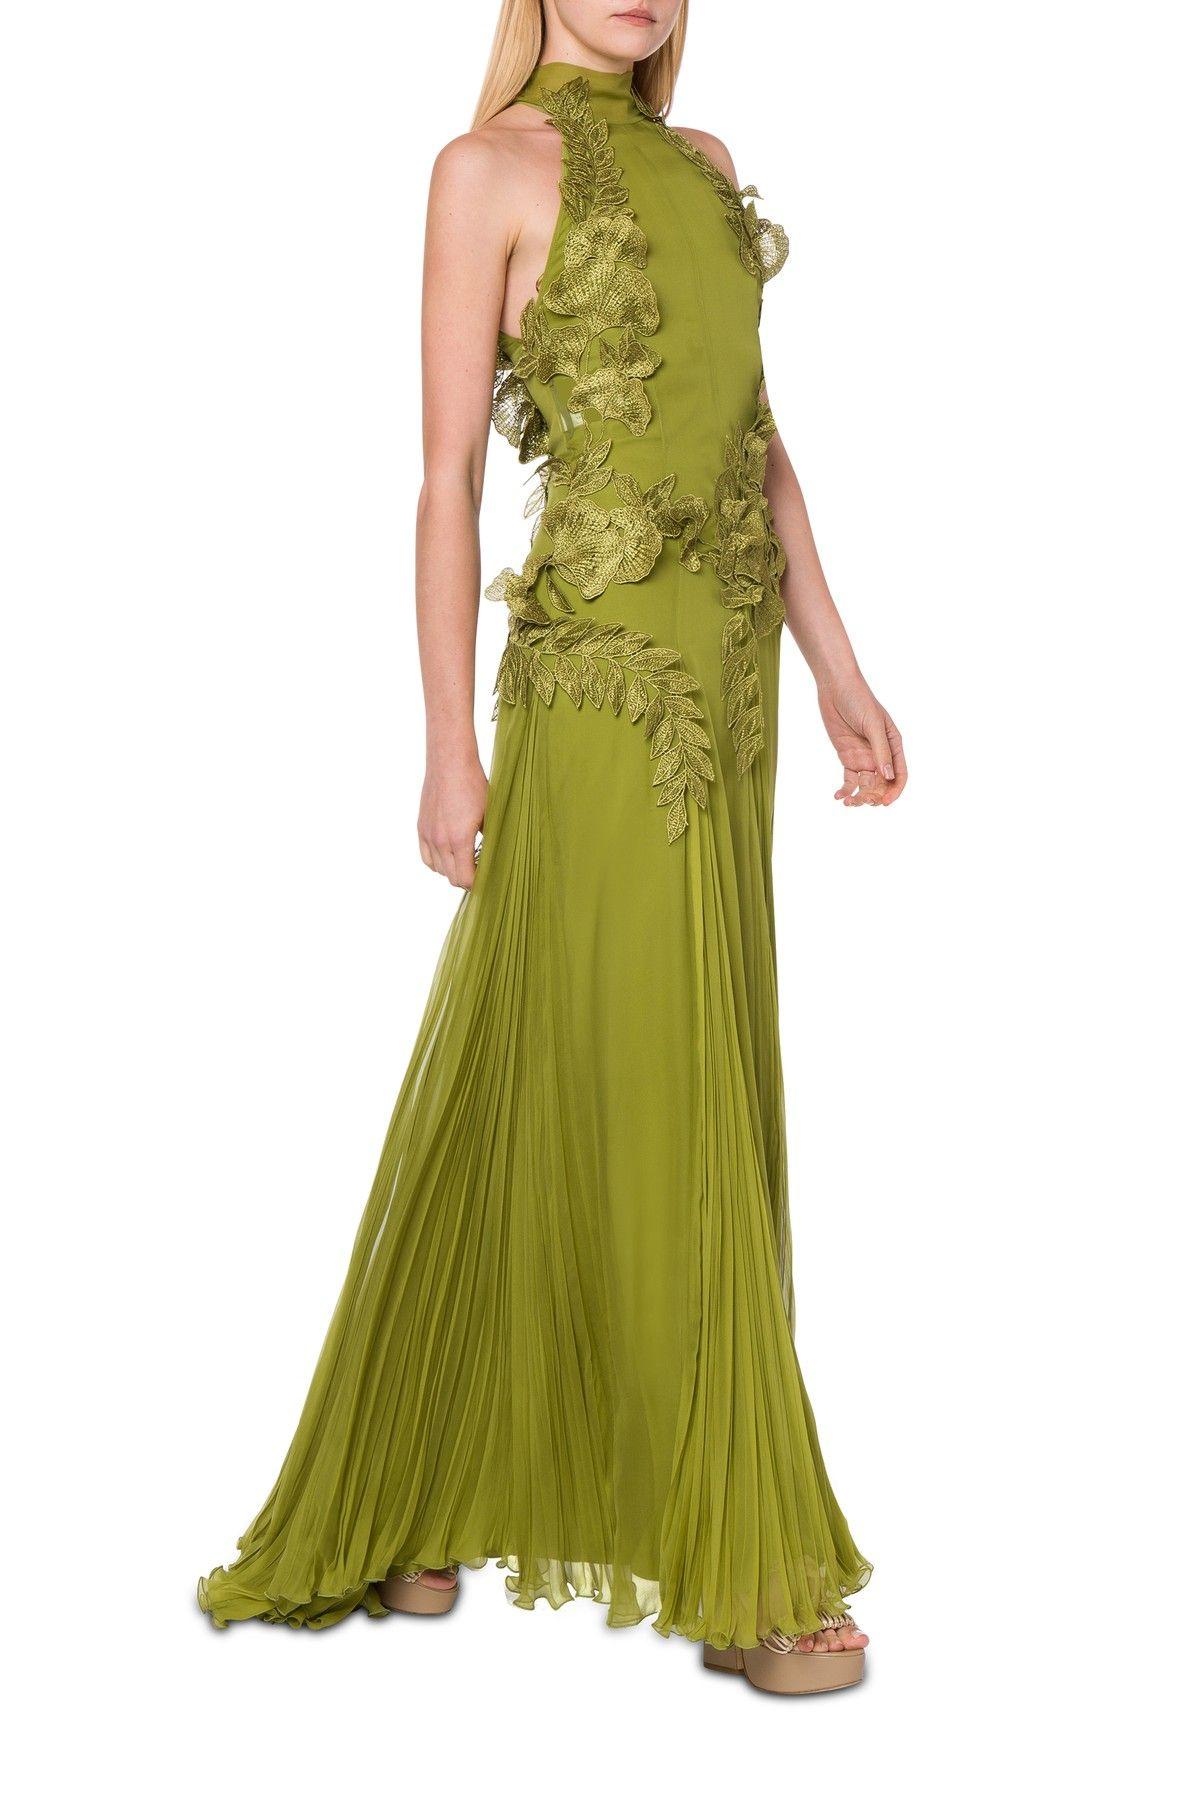 Depression fond gambling Alberta Ferretti Eco-friendly Chiffon Dress With Flower And Floral Pattern  Embroidery in Green | Lyst